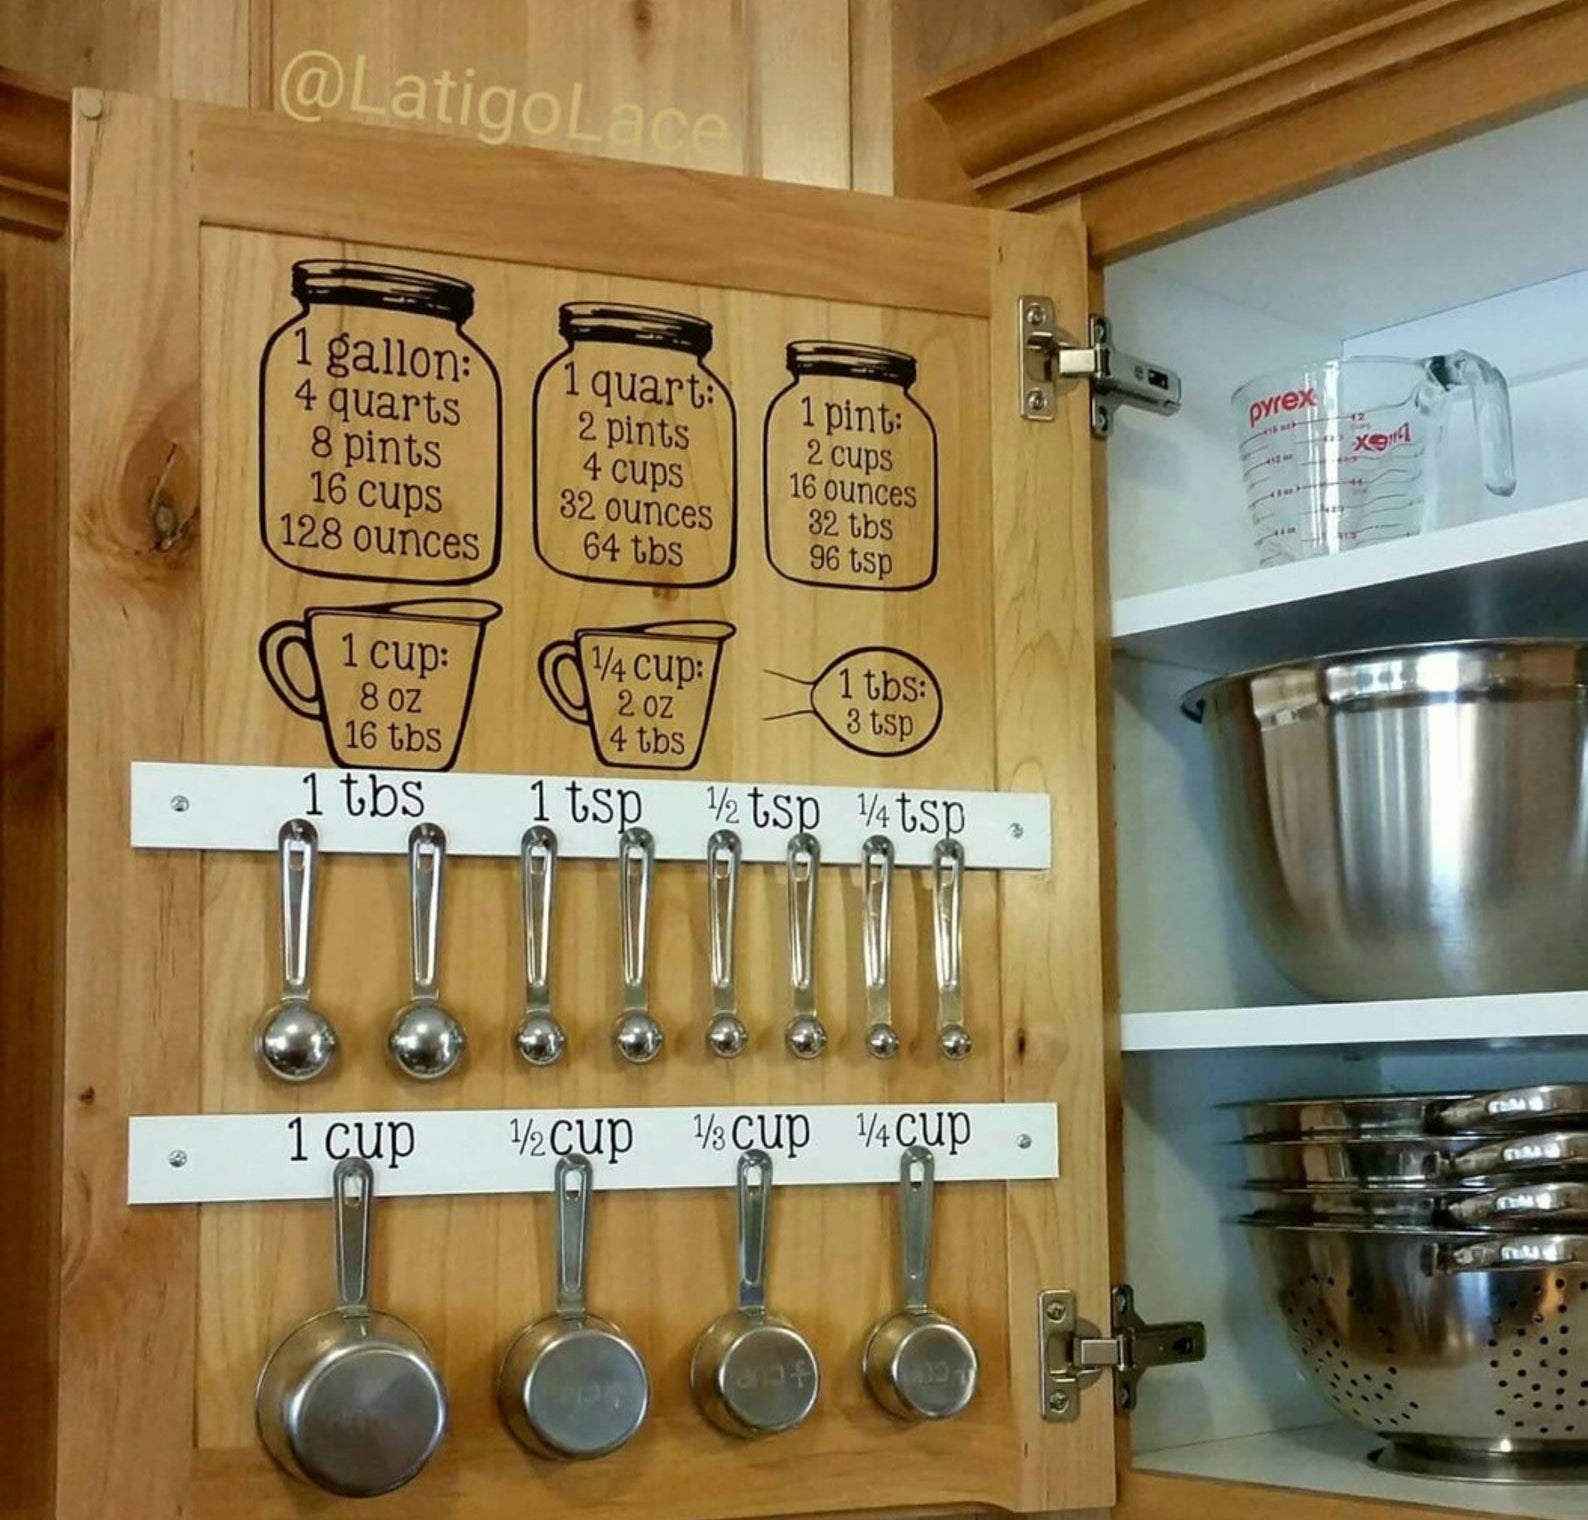 Decals hanging inside of a kitchen cabinet